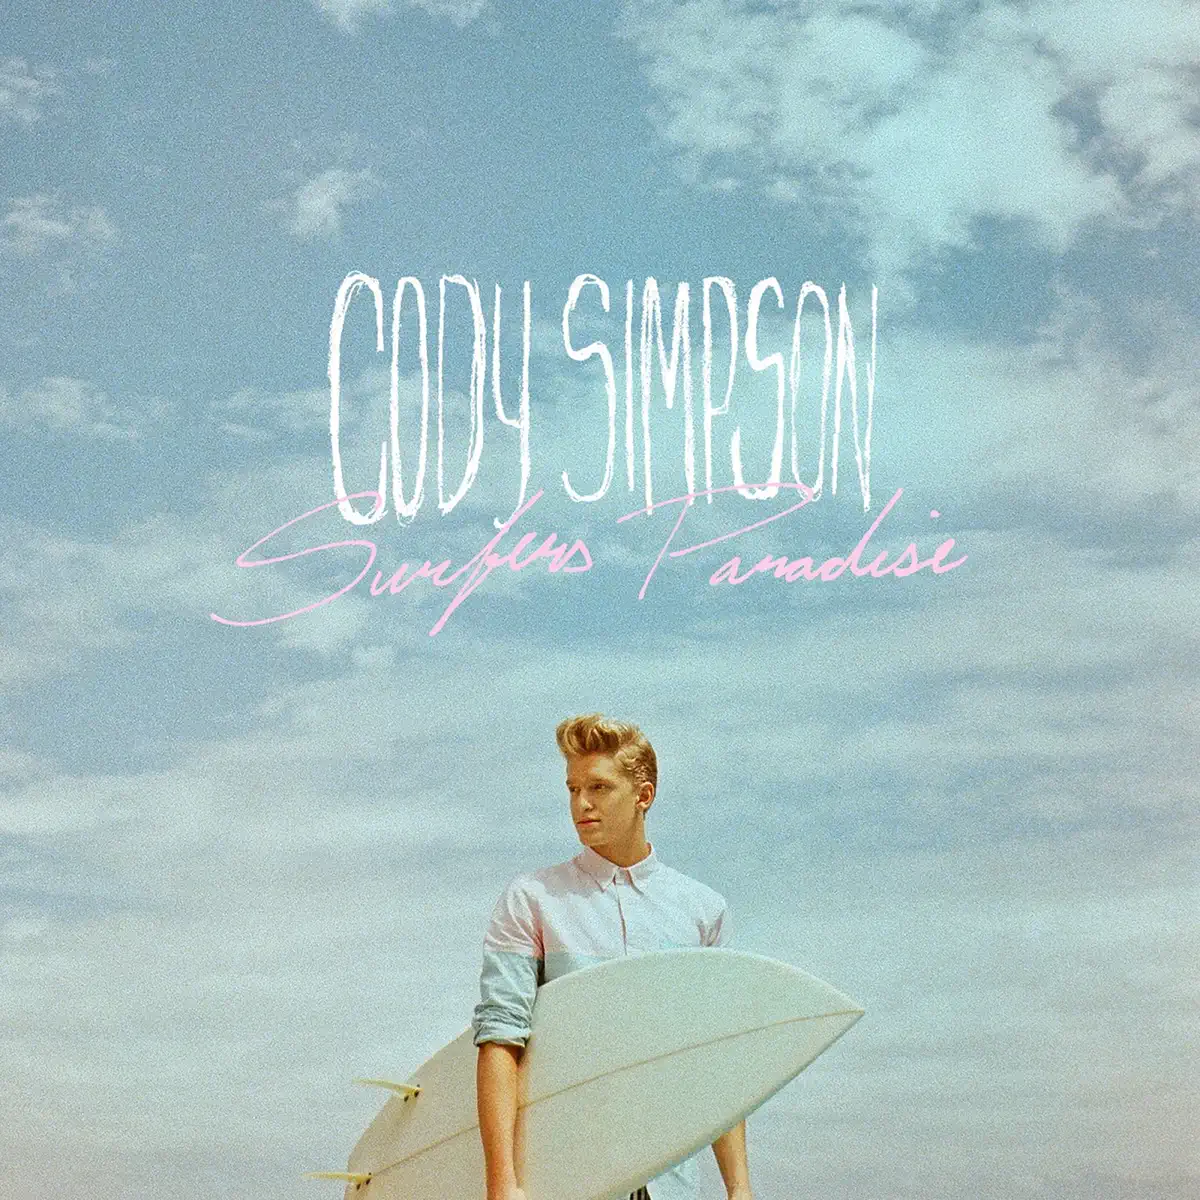 Cody Simpson - Surfers Paradise (Expanded) (2013) [iTunes Plus AAC M4A]-新房子